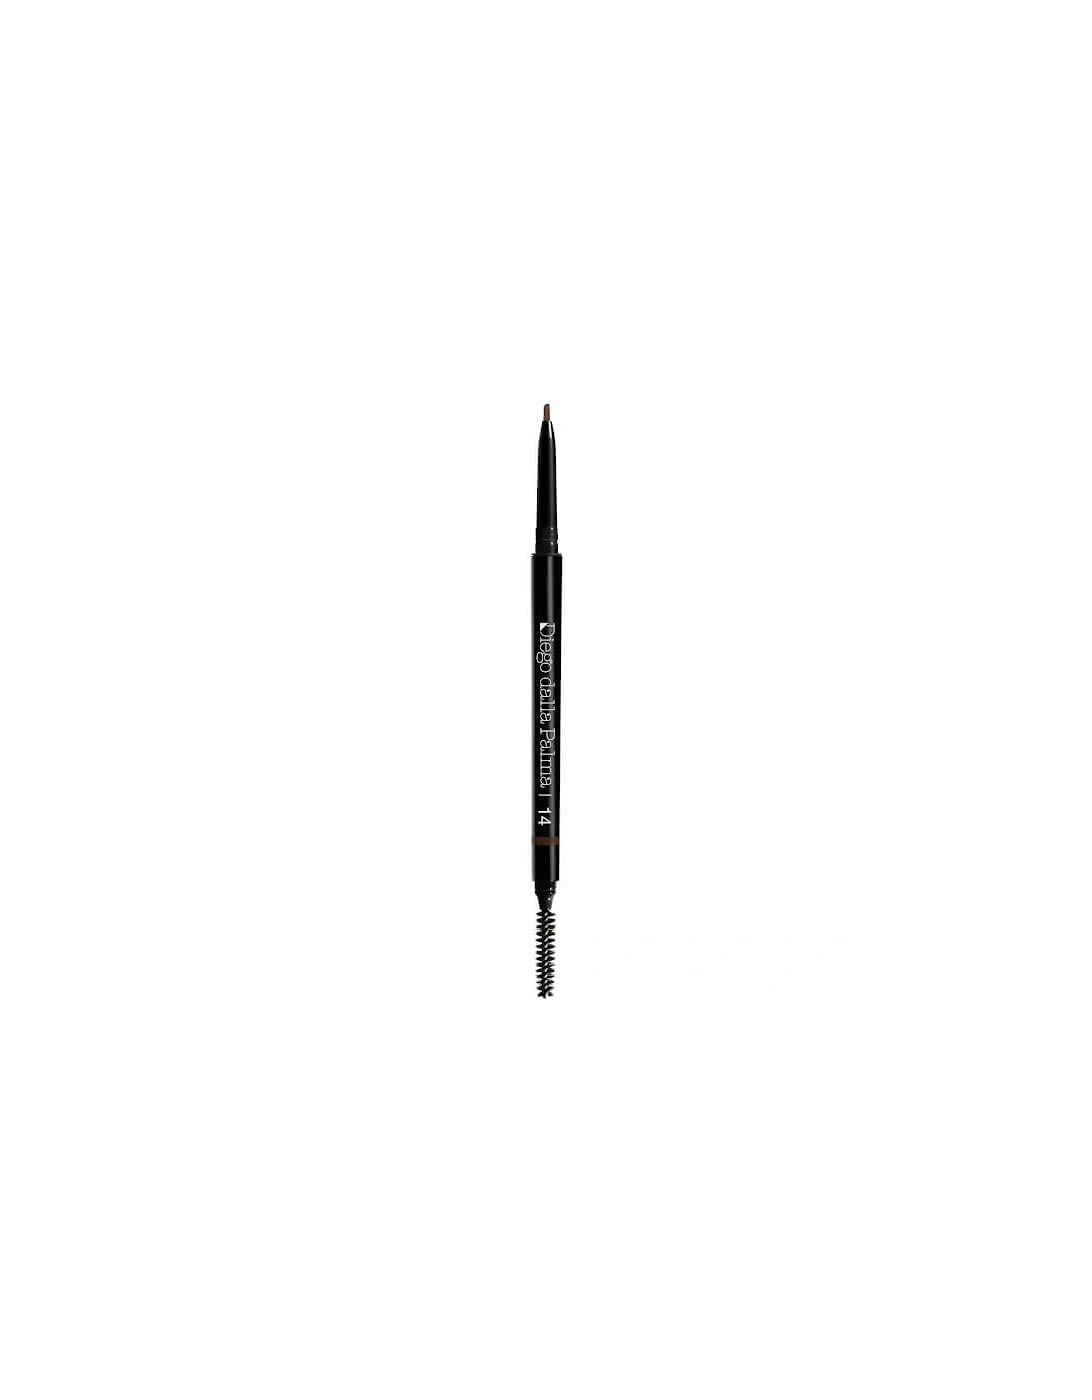 High Precision Brow Pencil Water Resistant - 14 0.09g, 2 of 1